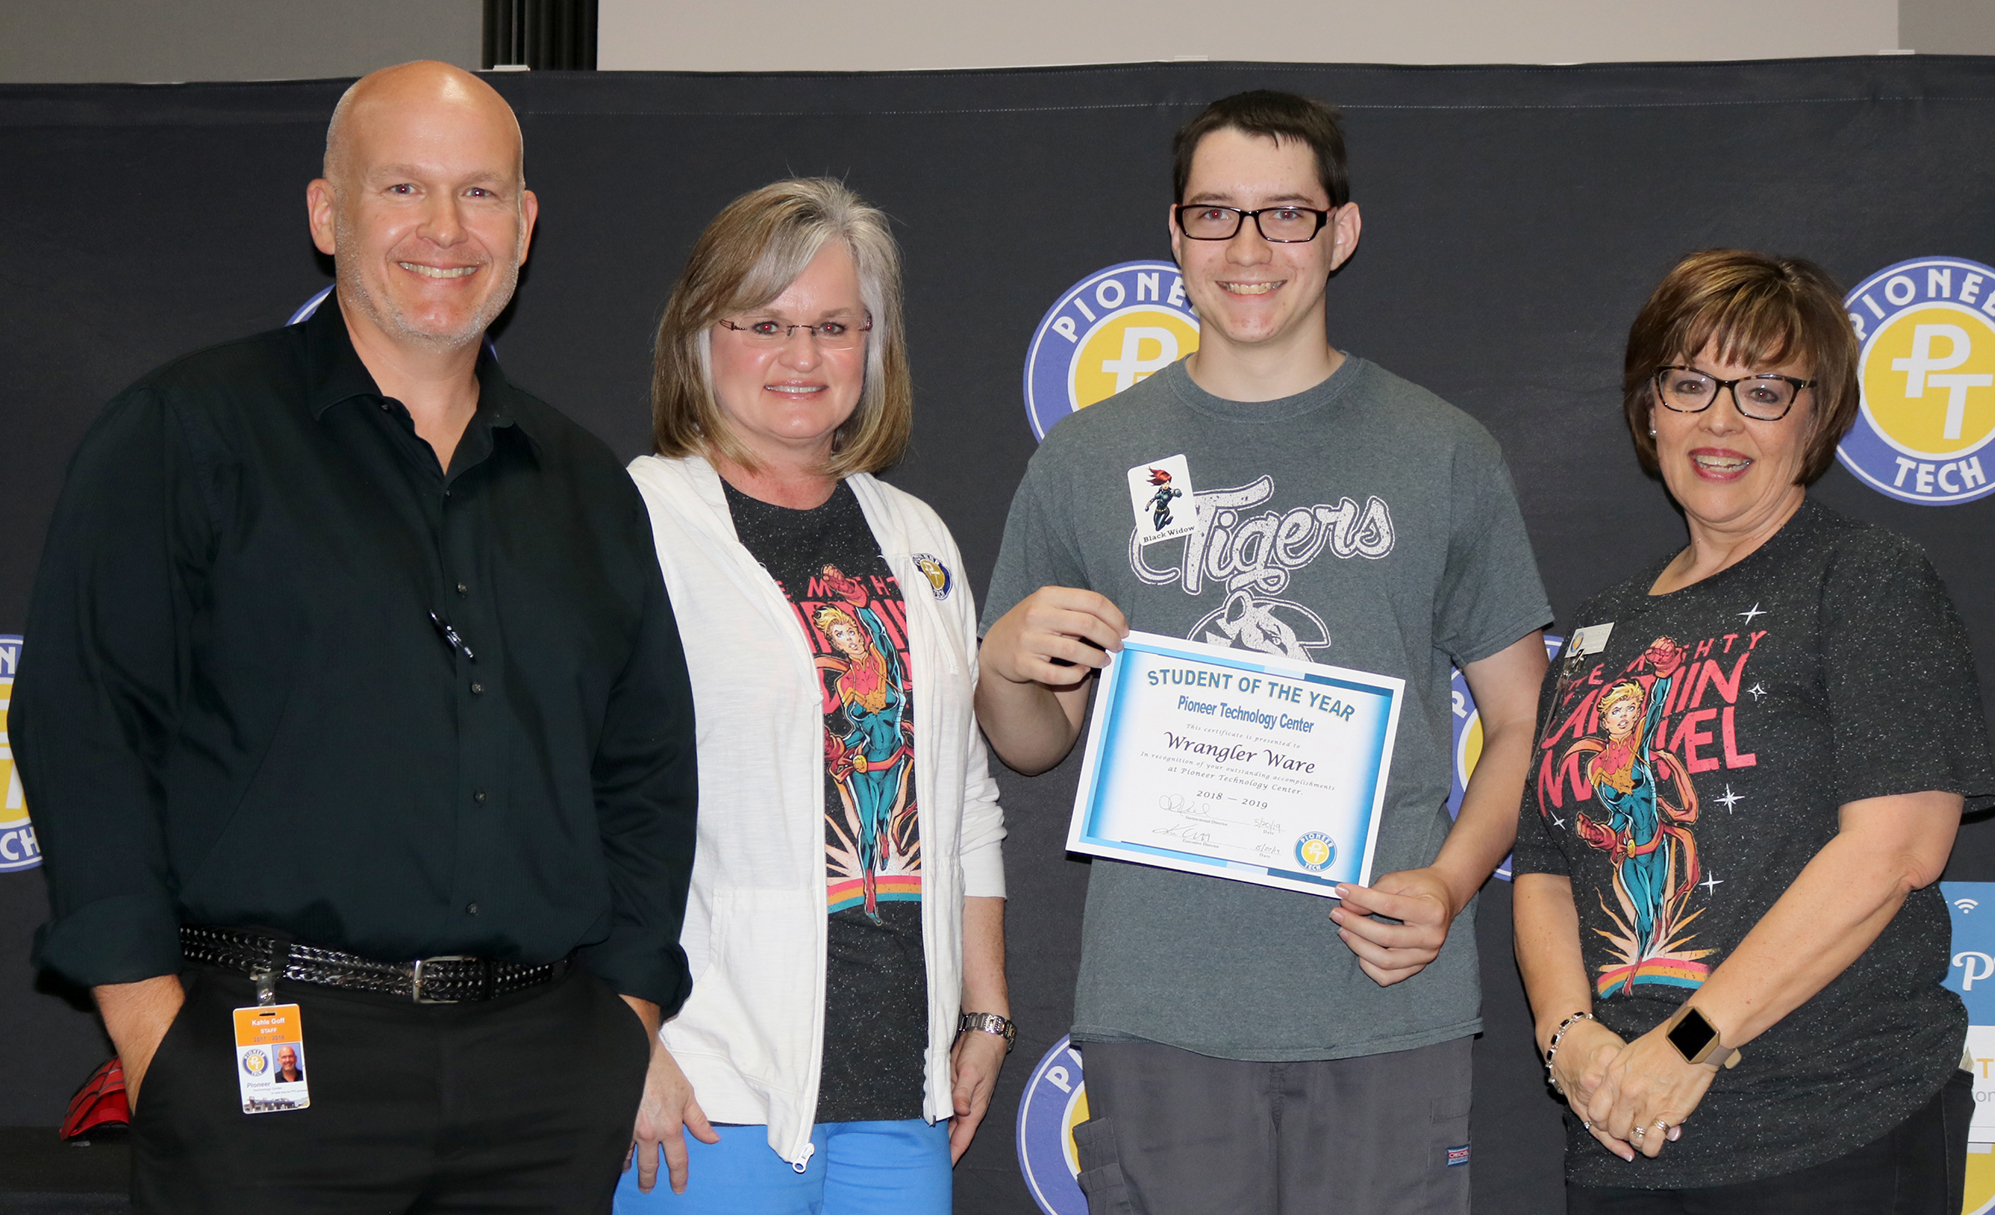 Wrangler Ware named Pioneer Tech Student of the Year